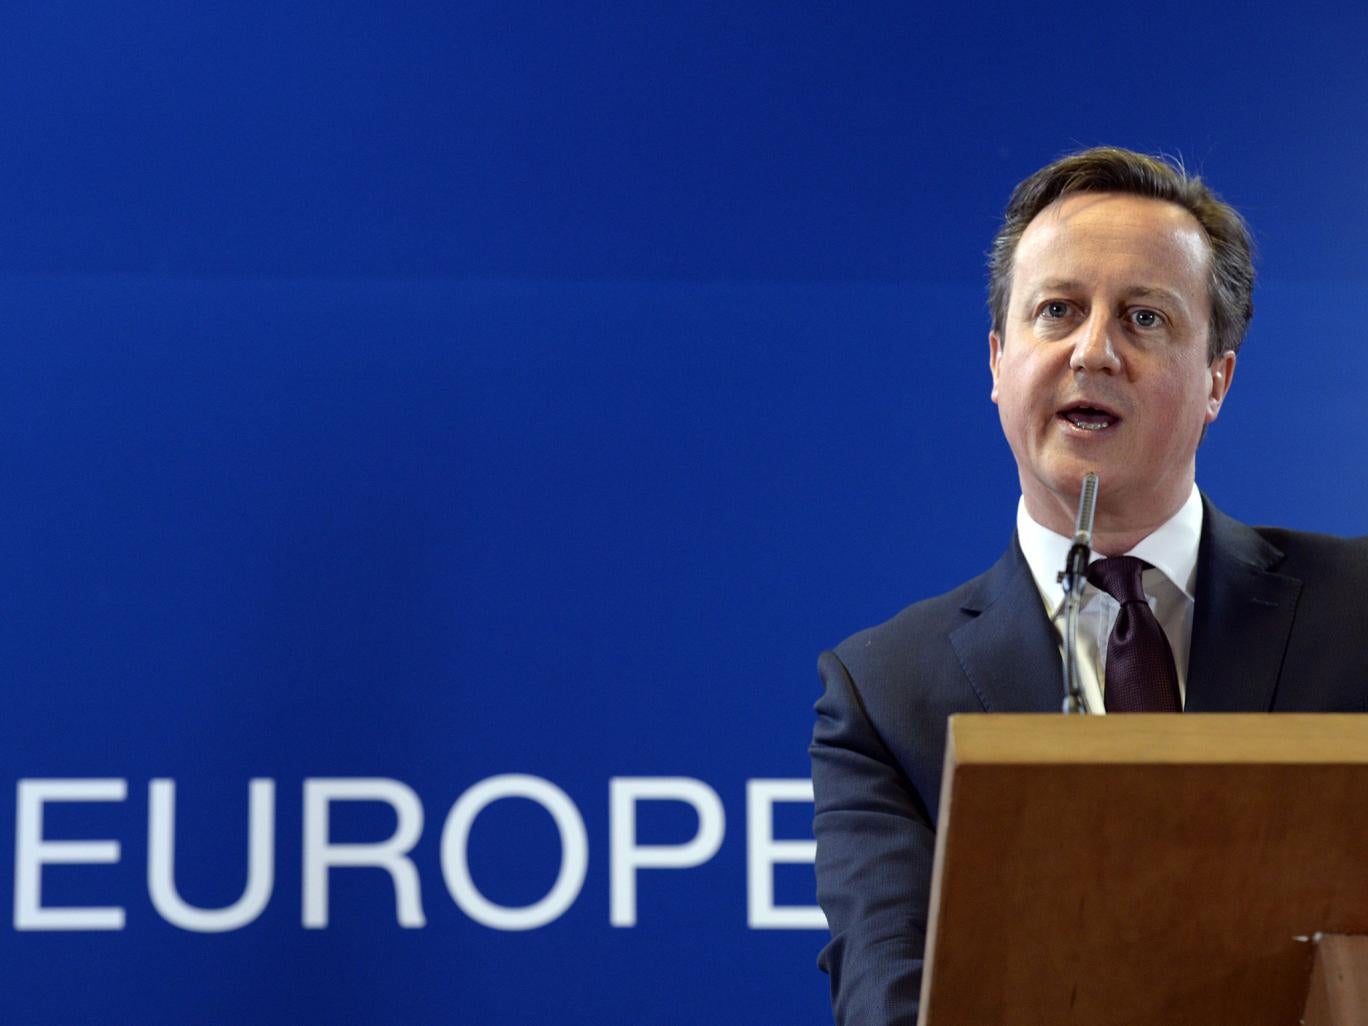 Cameron said he would campaign to keep the UK in the European Union